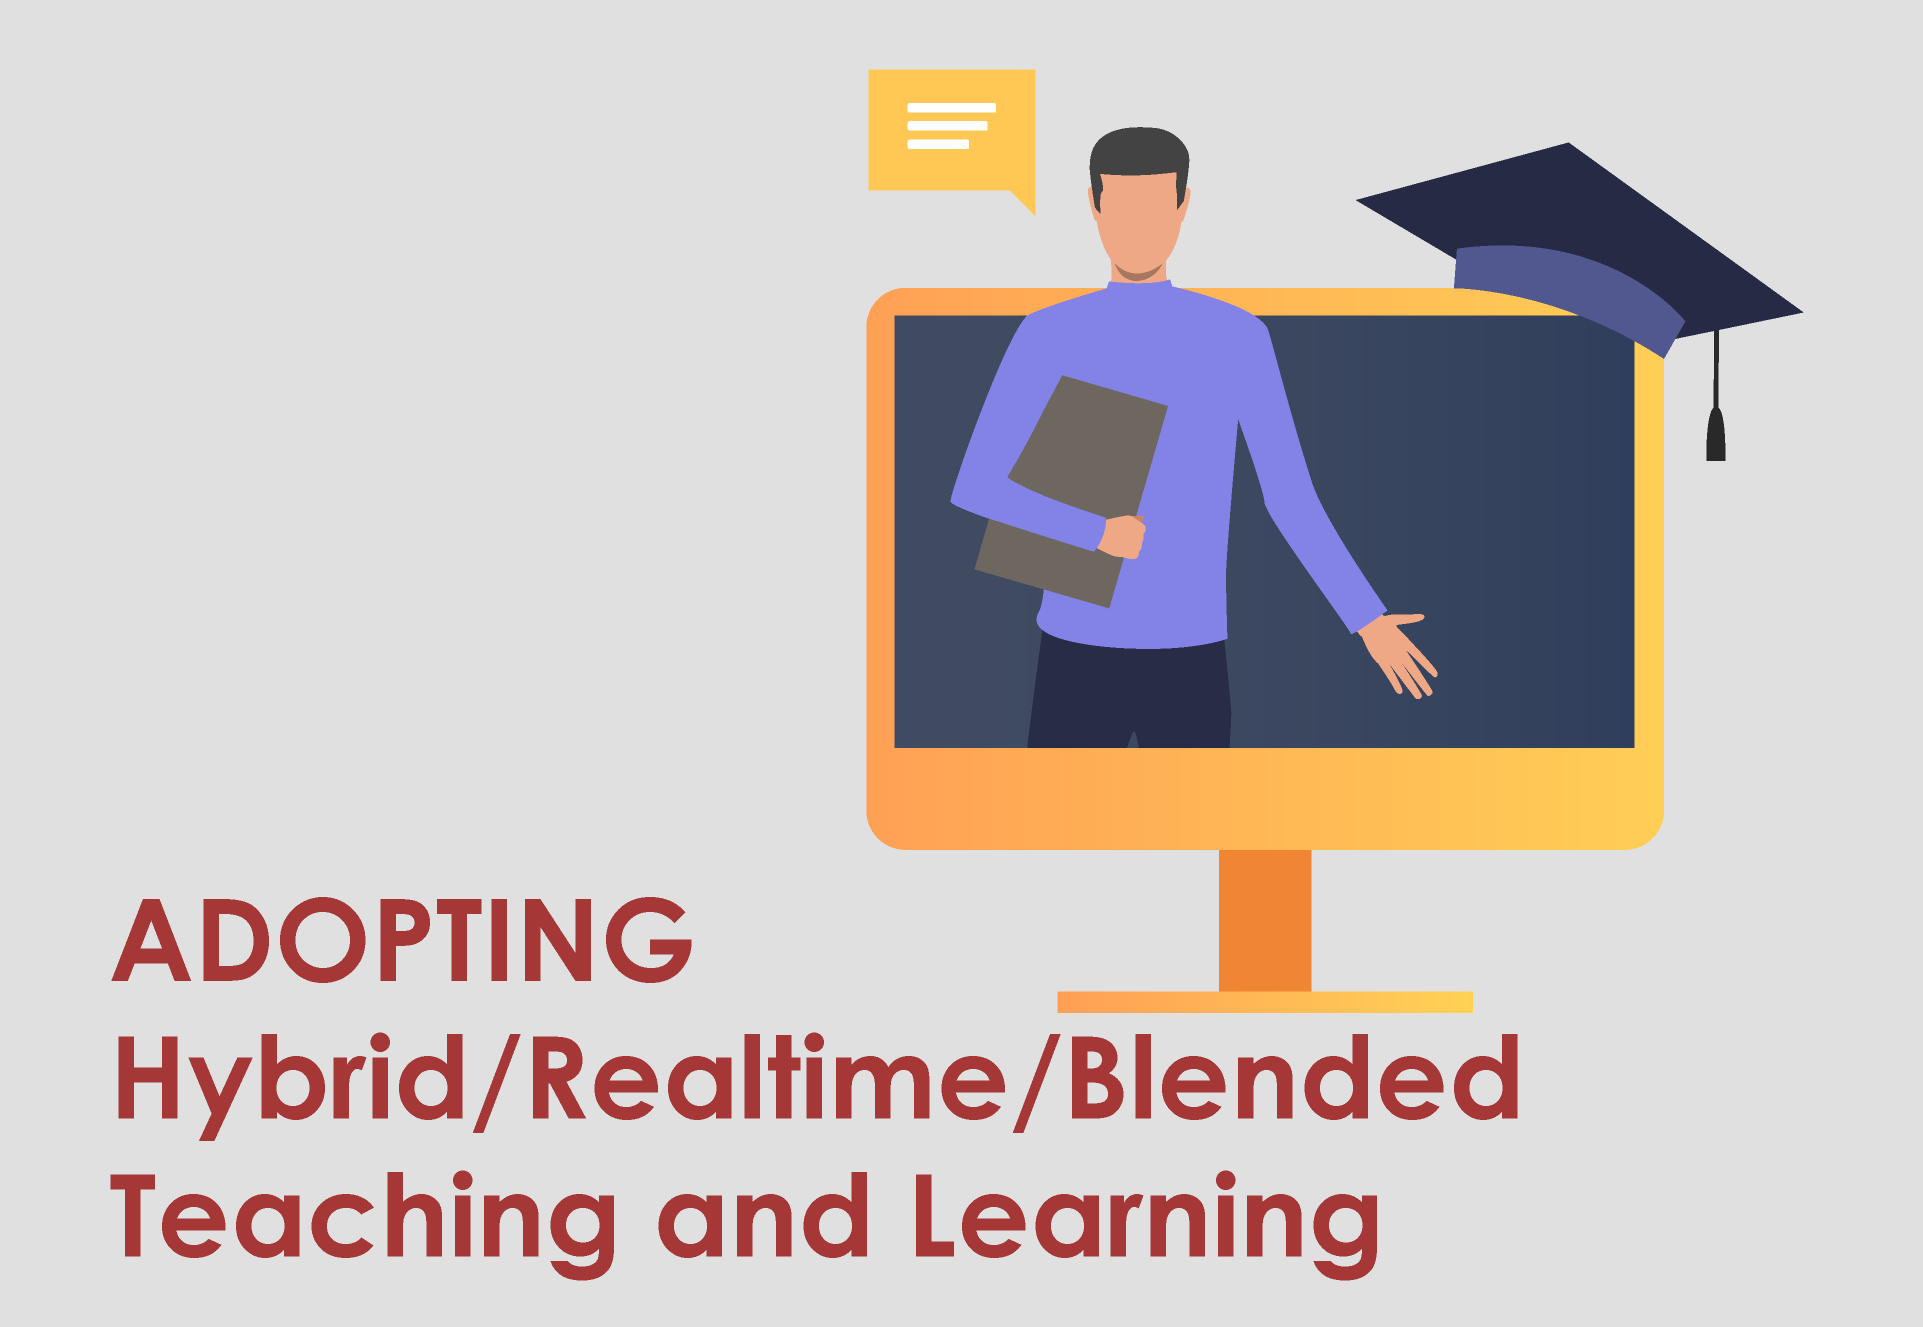 Adopting real time online learning and teaching